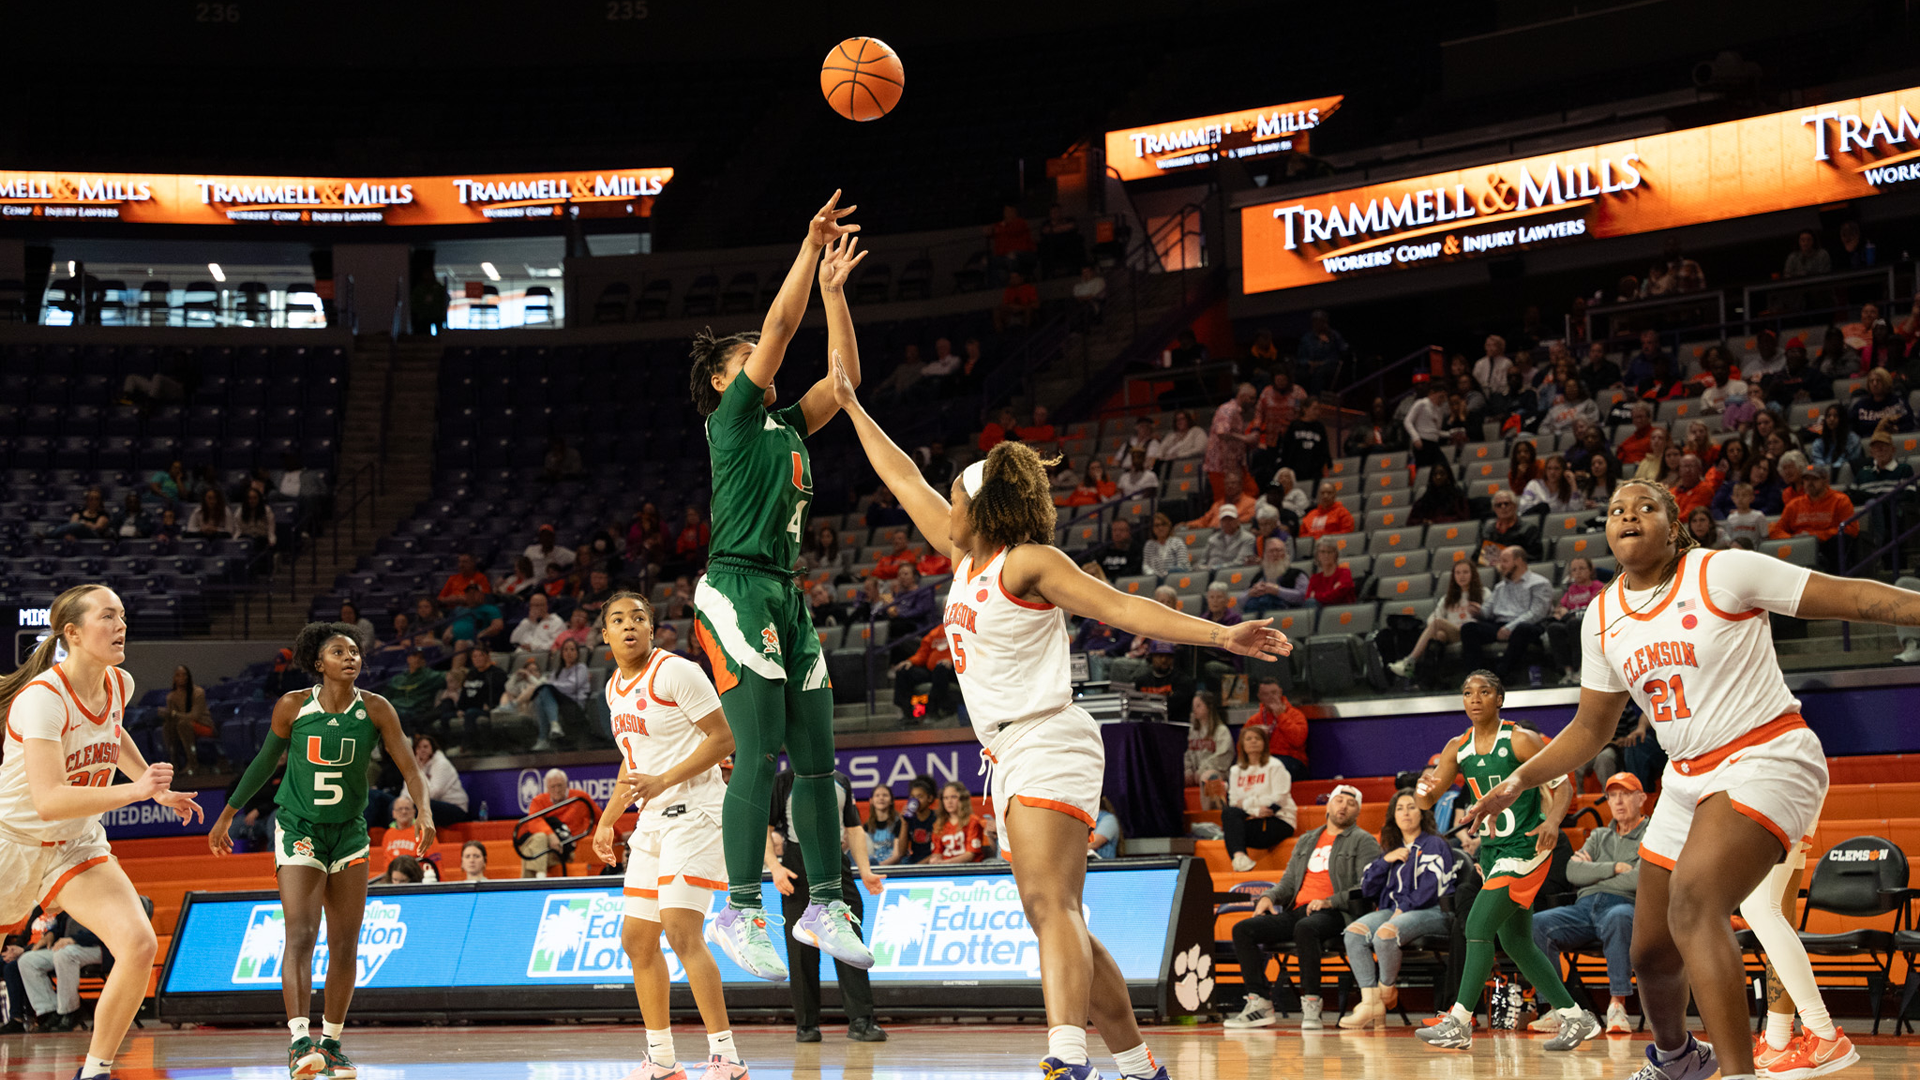 Roberts, Canes Complete Season Sweep of Clemson